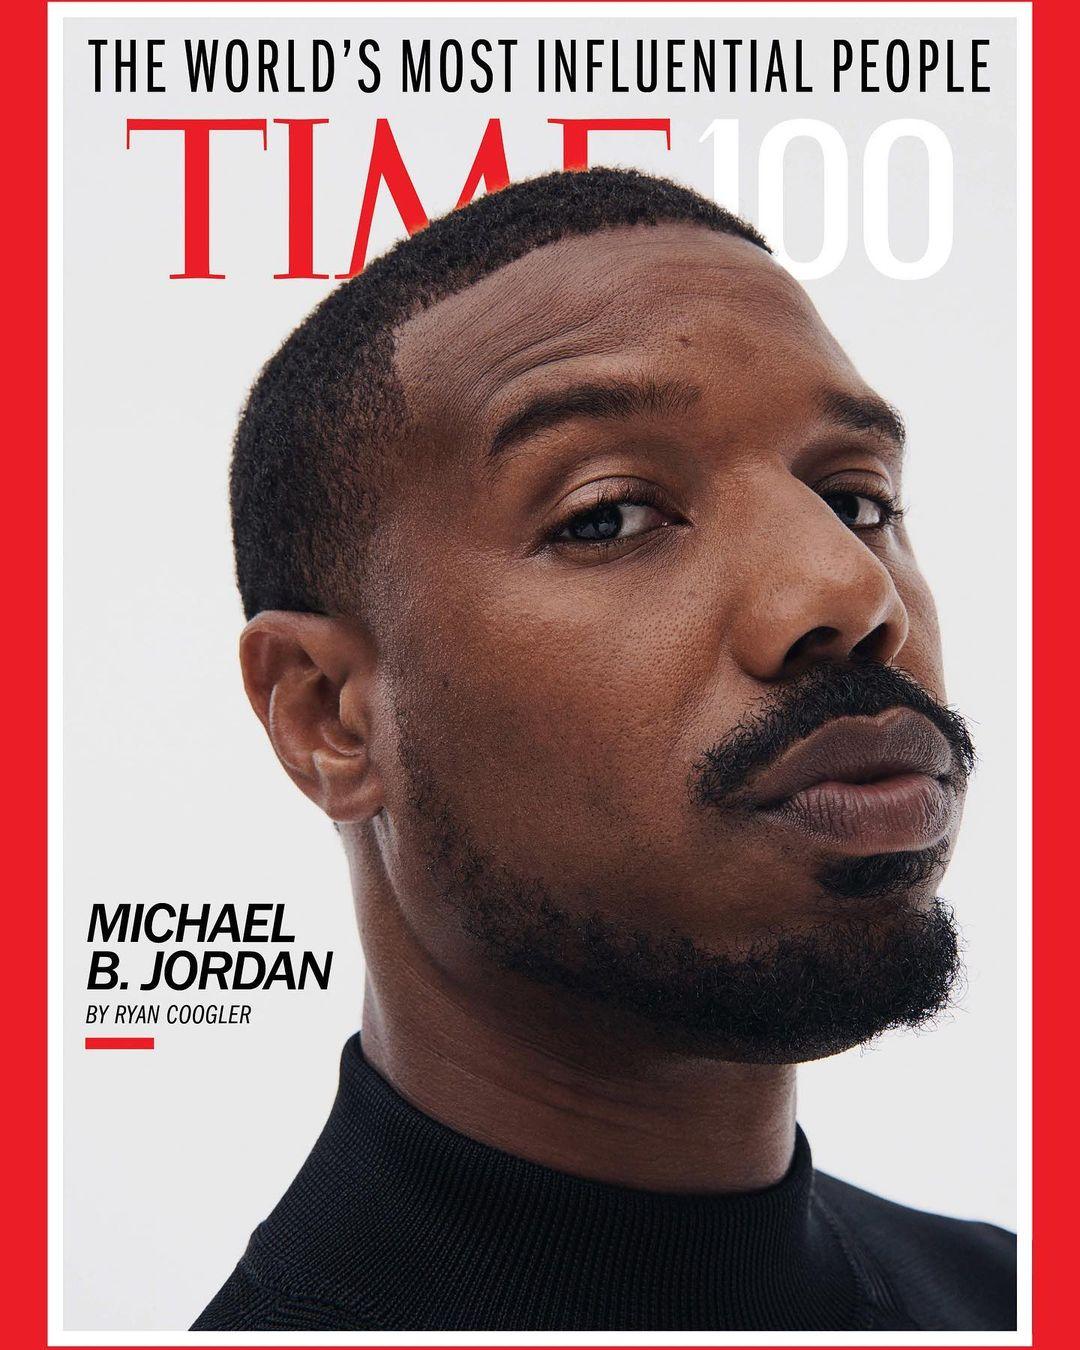 Michael B. Jordan listed among most influential people in 2020 and 2023